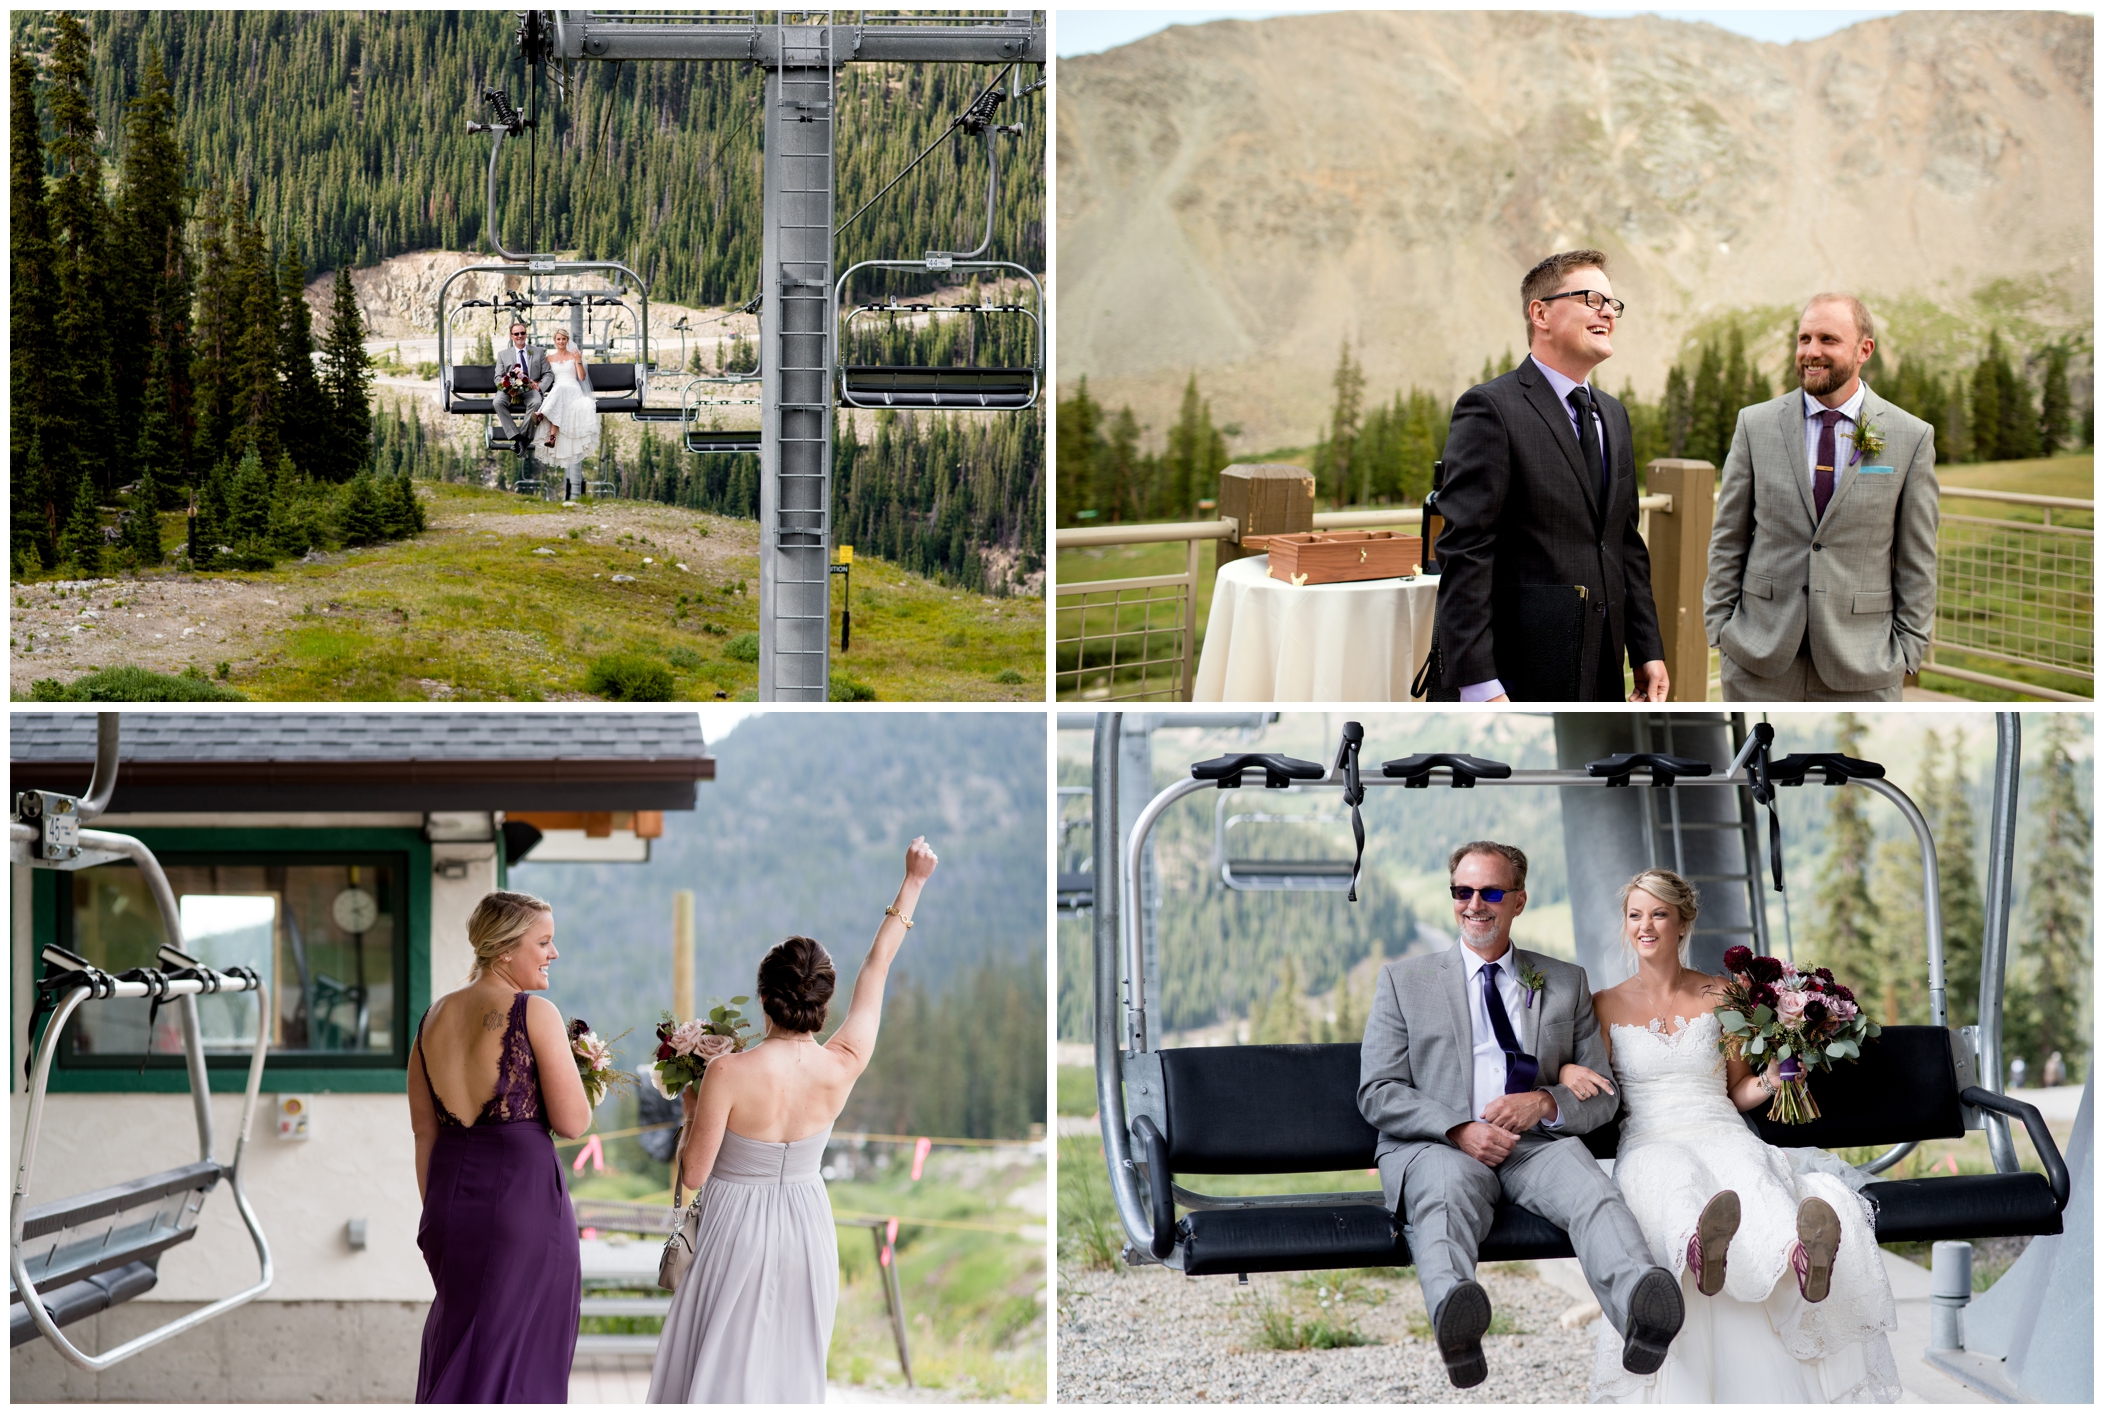 bride riding chairlift to walk down aisle